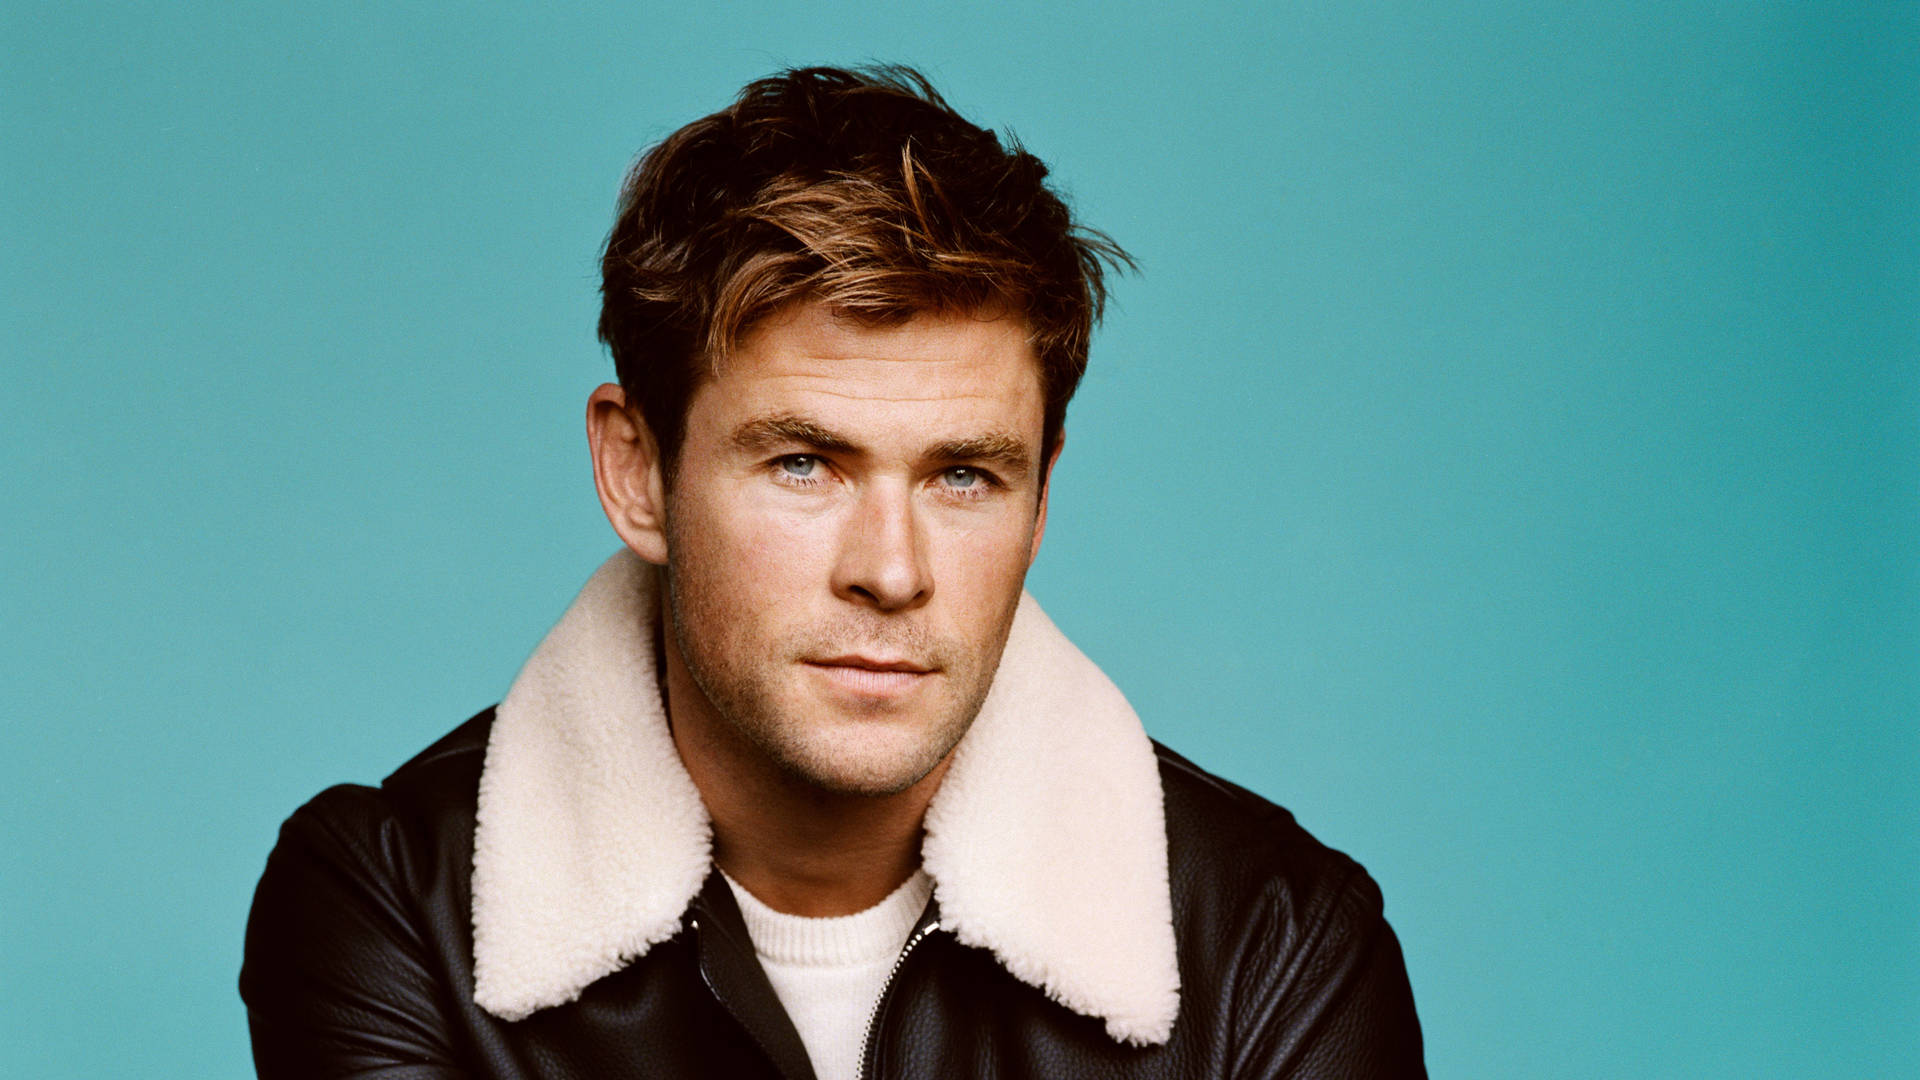 Chris Hemsworth In Fur And Leather Jacket